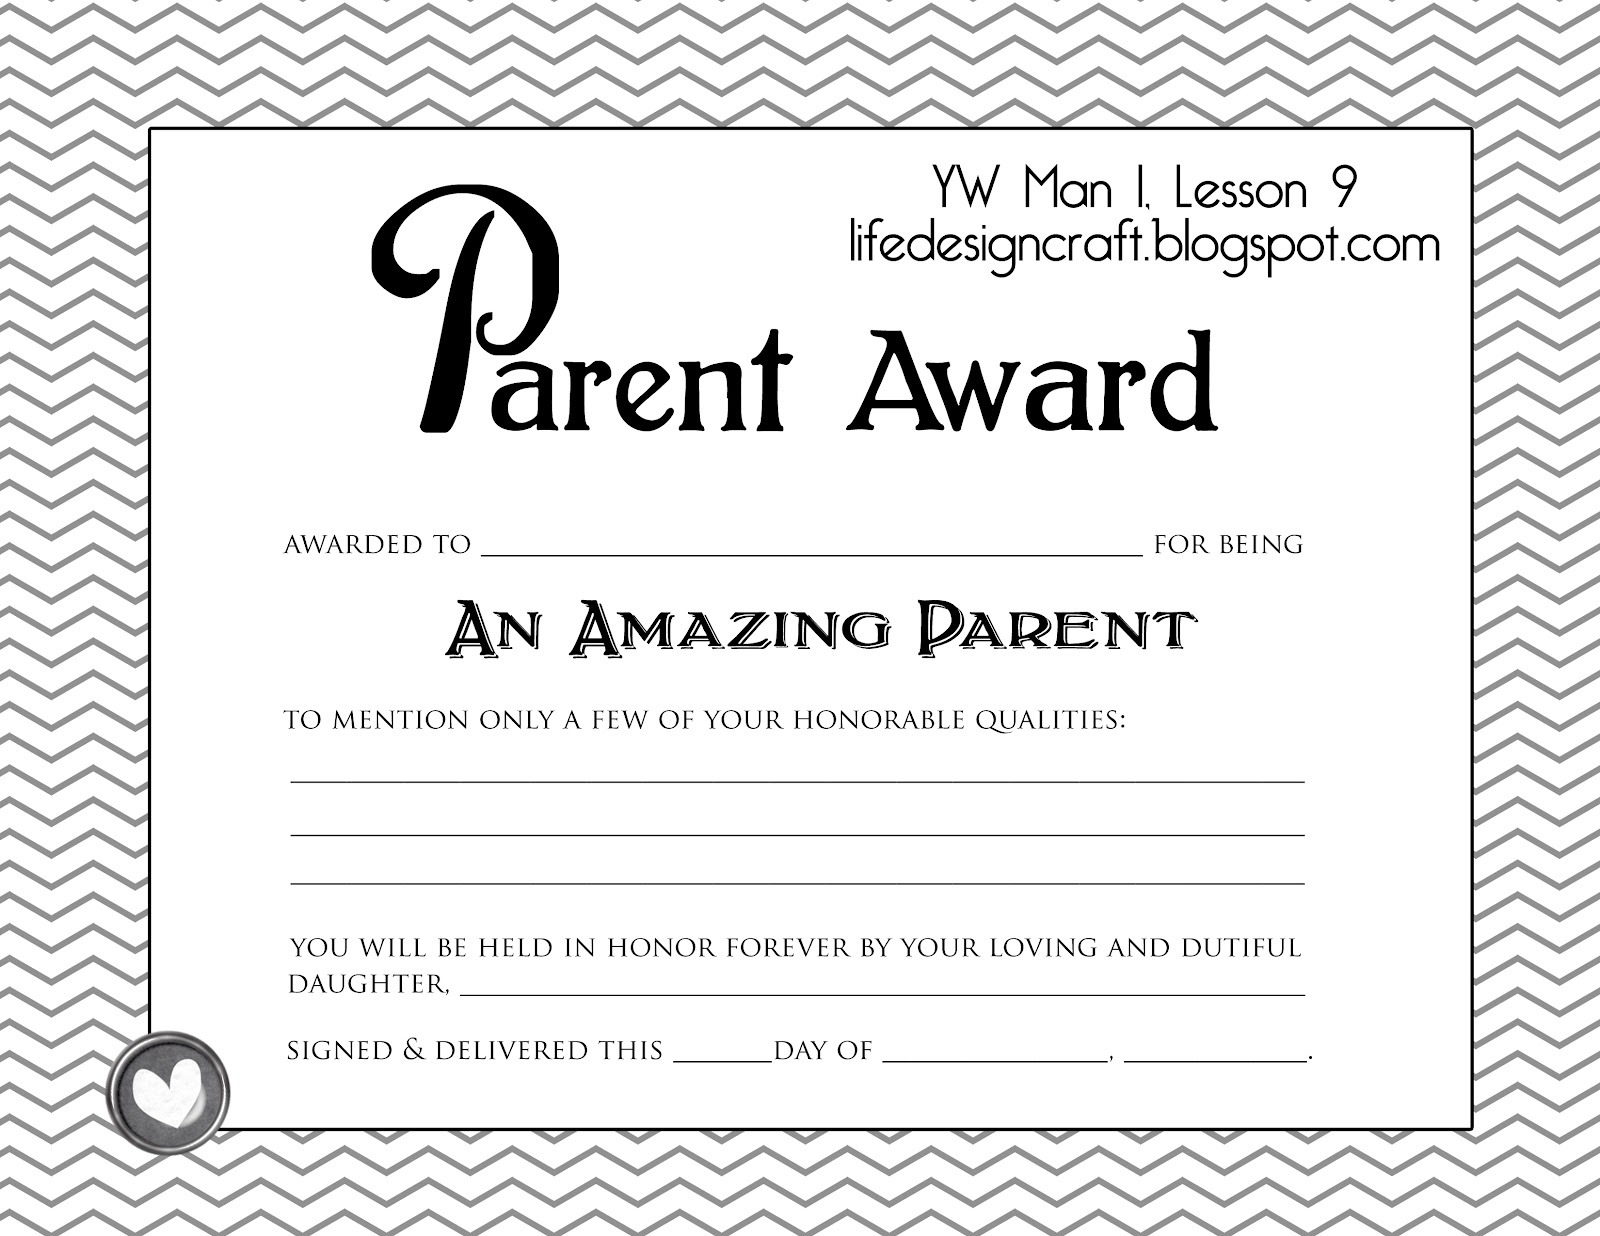 life-design-and-the-pursuit-of-craftiness-yw-lesson-honoring-your-parents